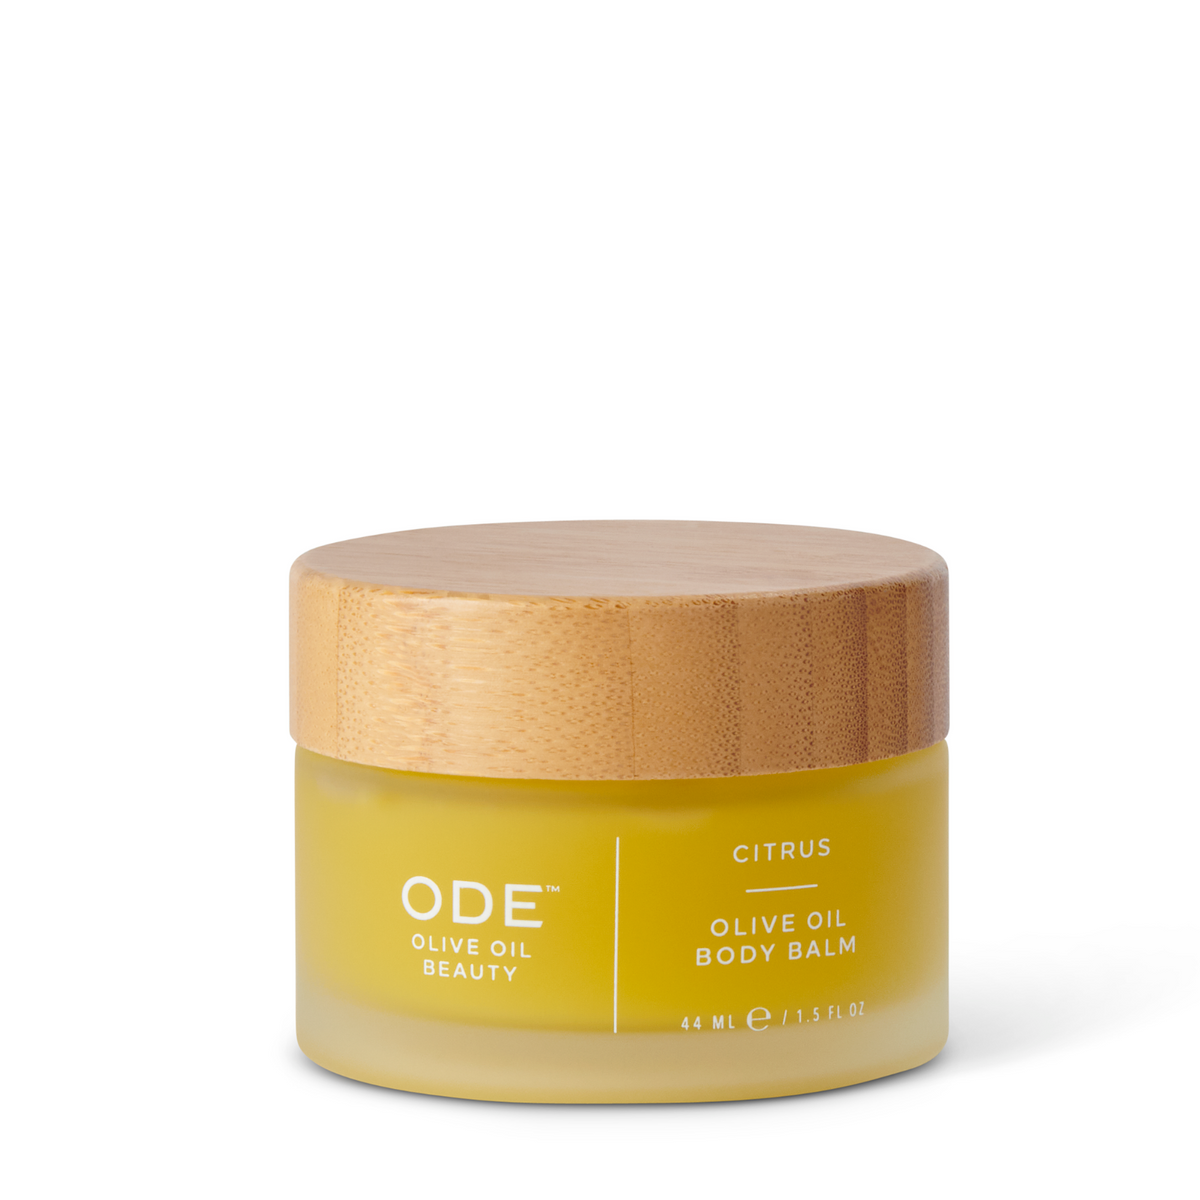 display_different_collection|ode-olive-oil-beauty-scents-citrus